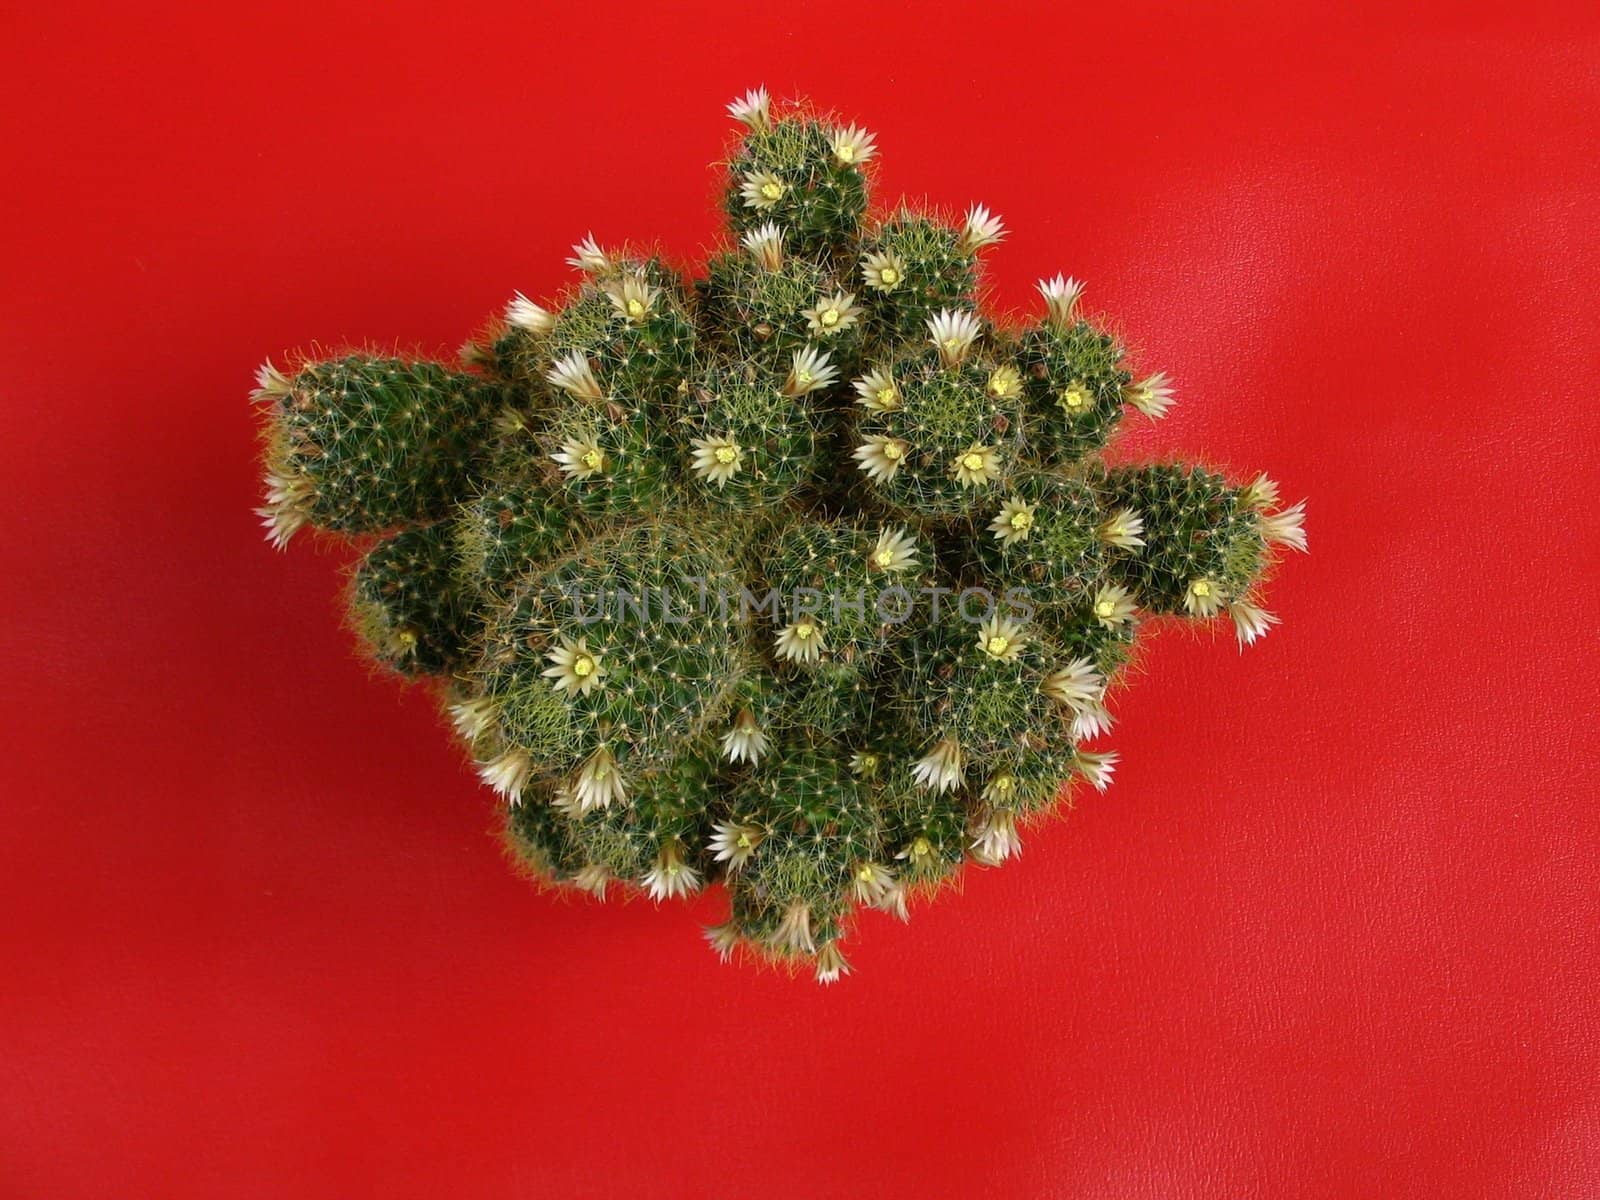 The Flowering cactus on red background..